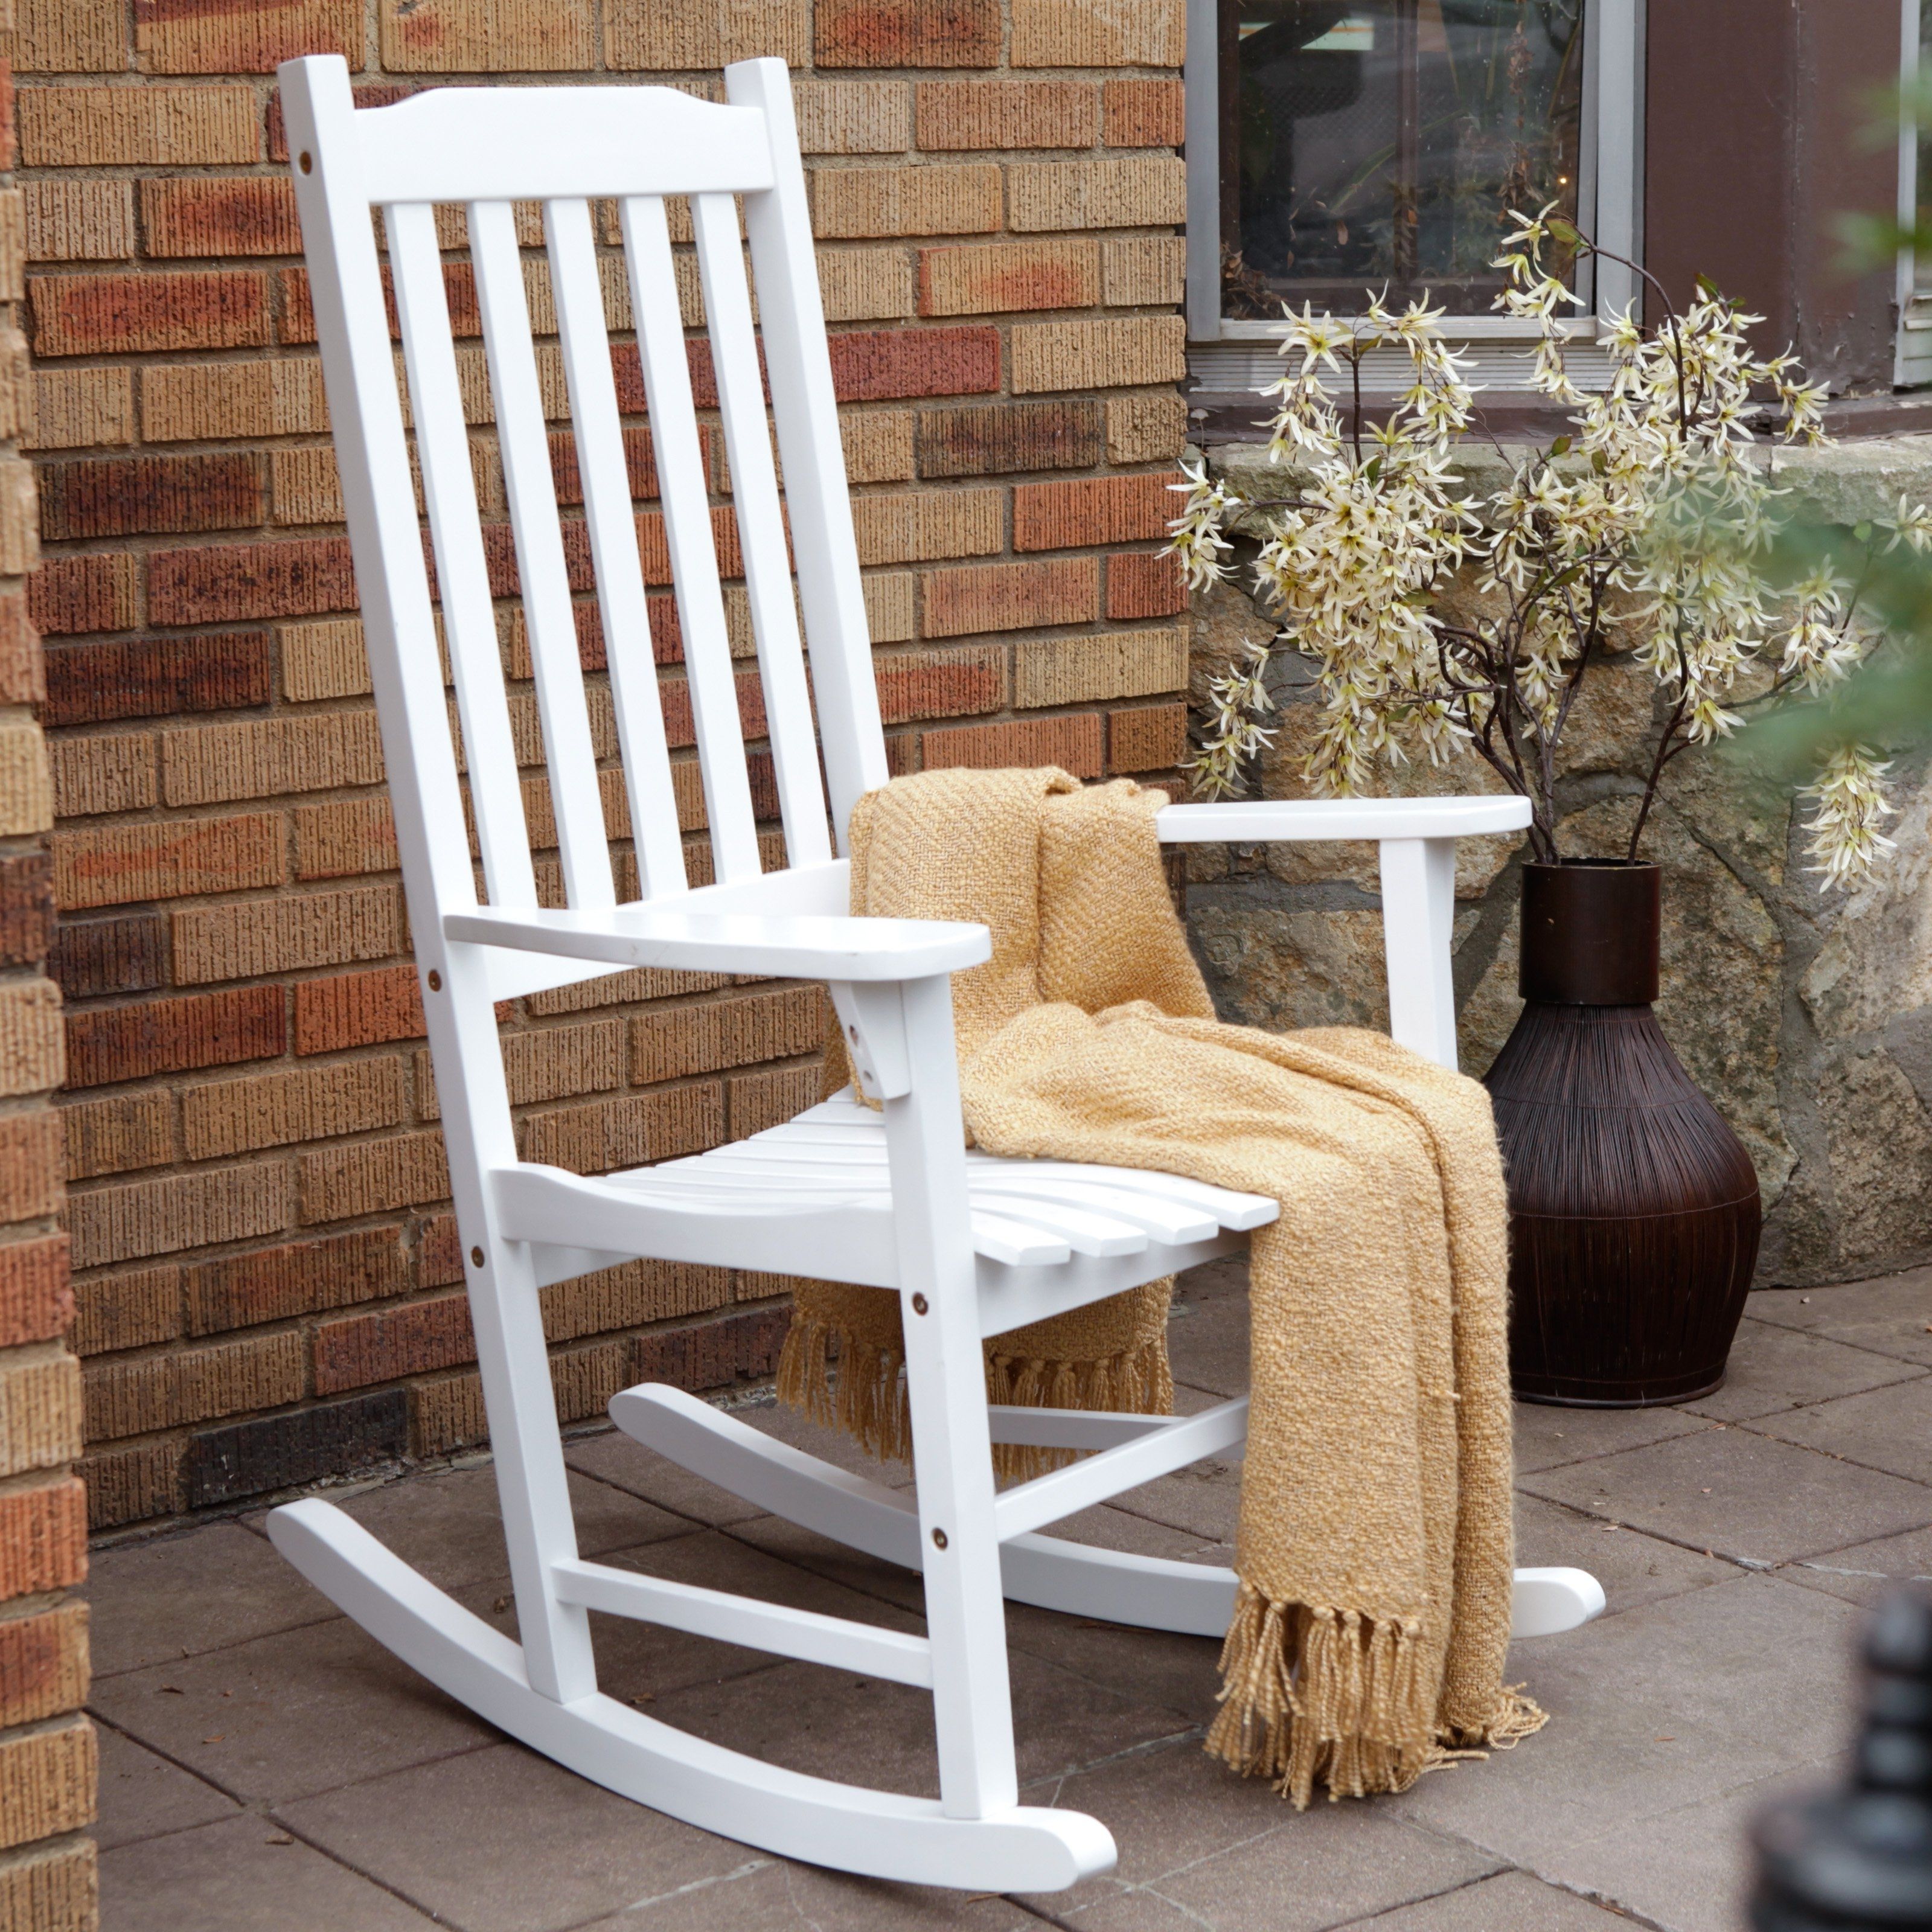 Coral Coast Indoor/outdoor Mission Slat Rocking Chair – White Pertaining To Most Current Rocking Chairs For Outside (View 11 of 15)